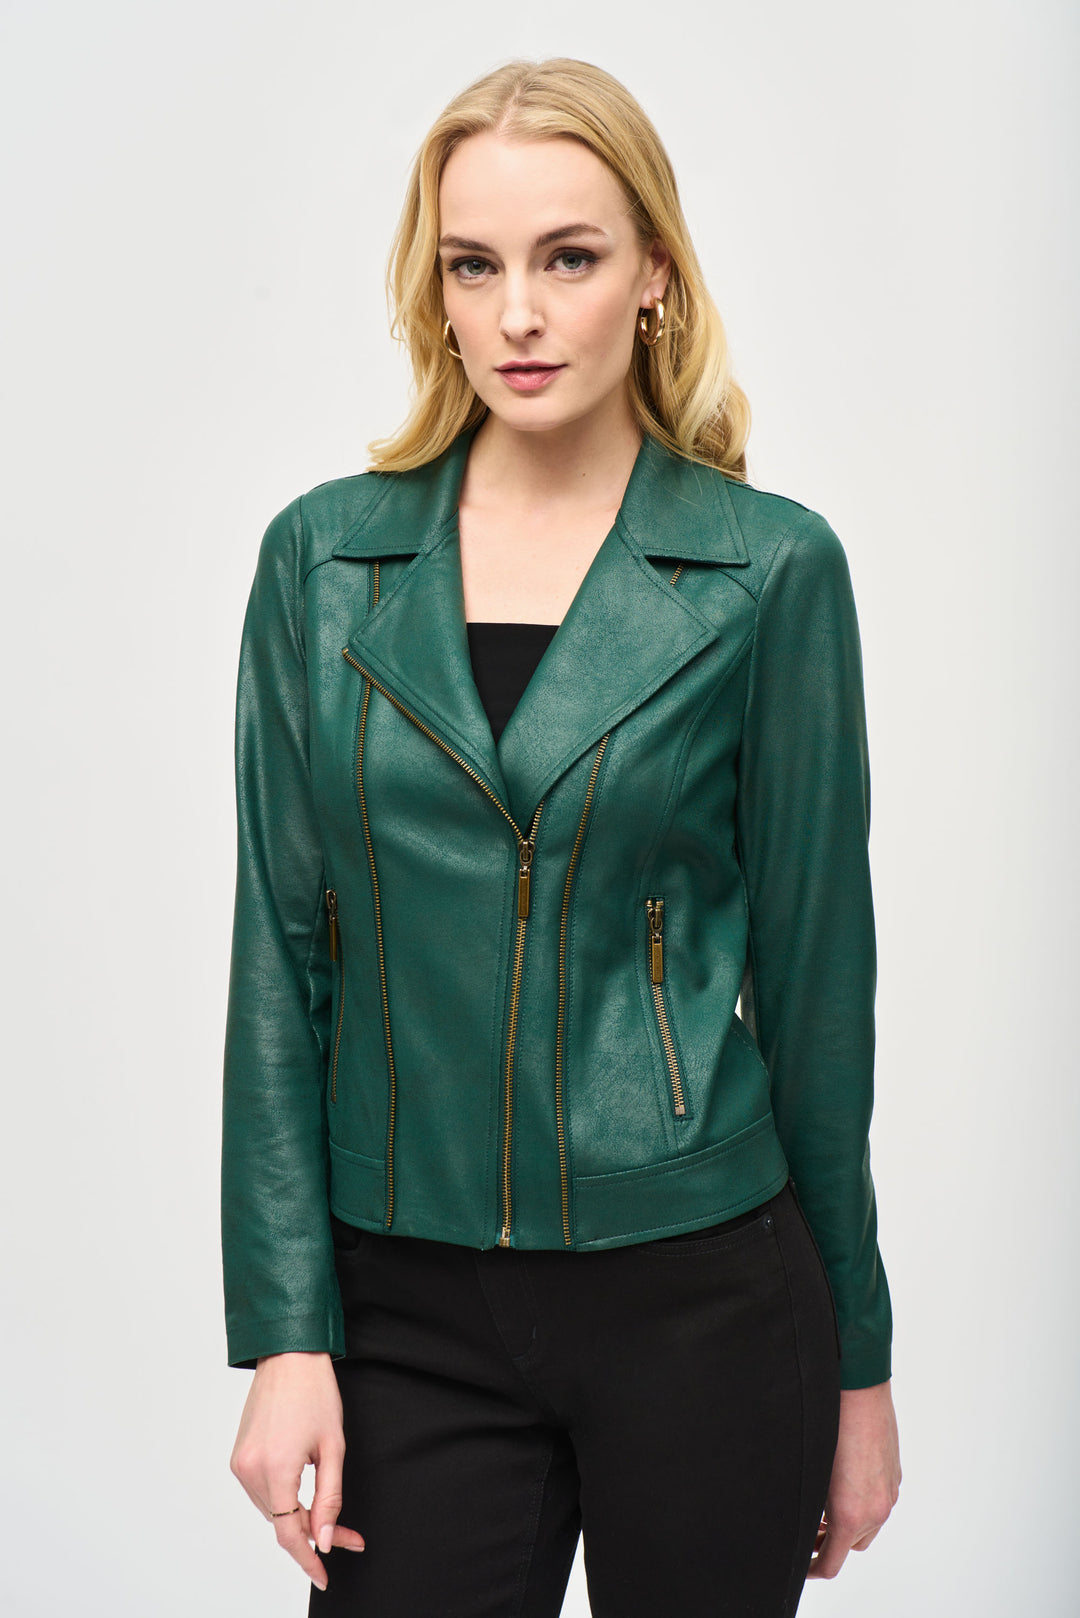 Joseph Ribkoff Fall 2024 This on-trend jacket boasts a wide lapel, faux leather fabric and edgy belt detail at the hem. Our favourite way to style this jacket is with a button-up tunic shirt, leggings and ankle boots.